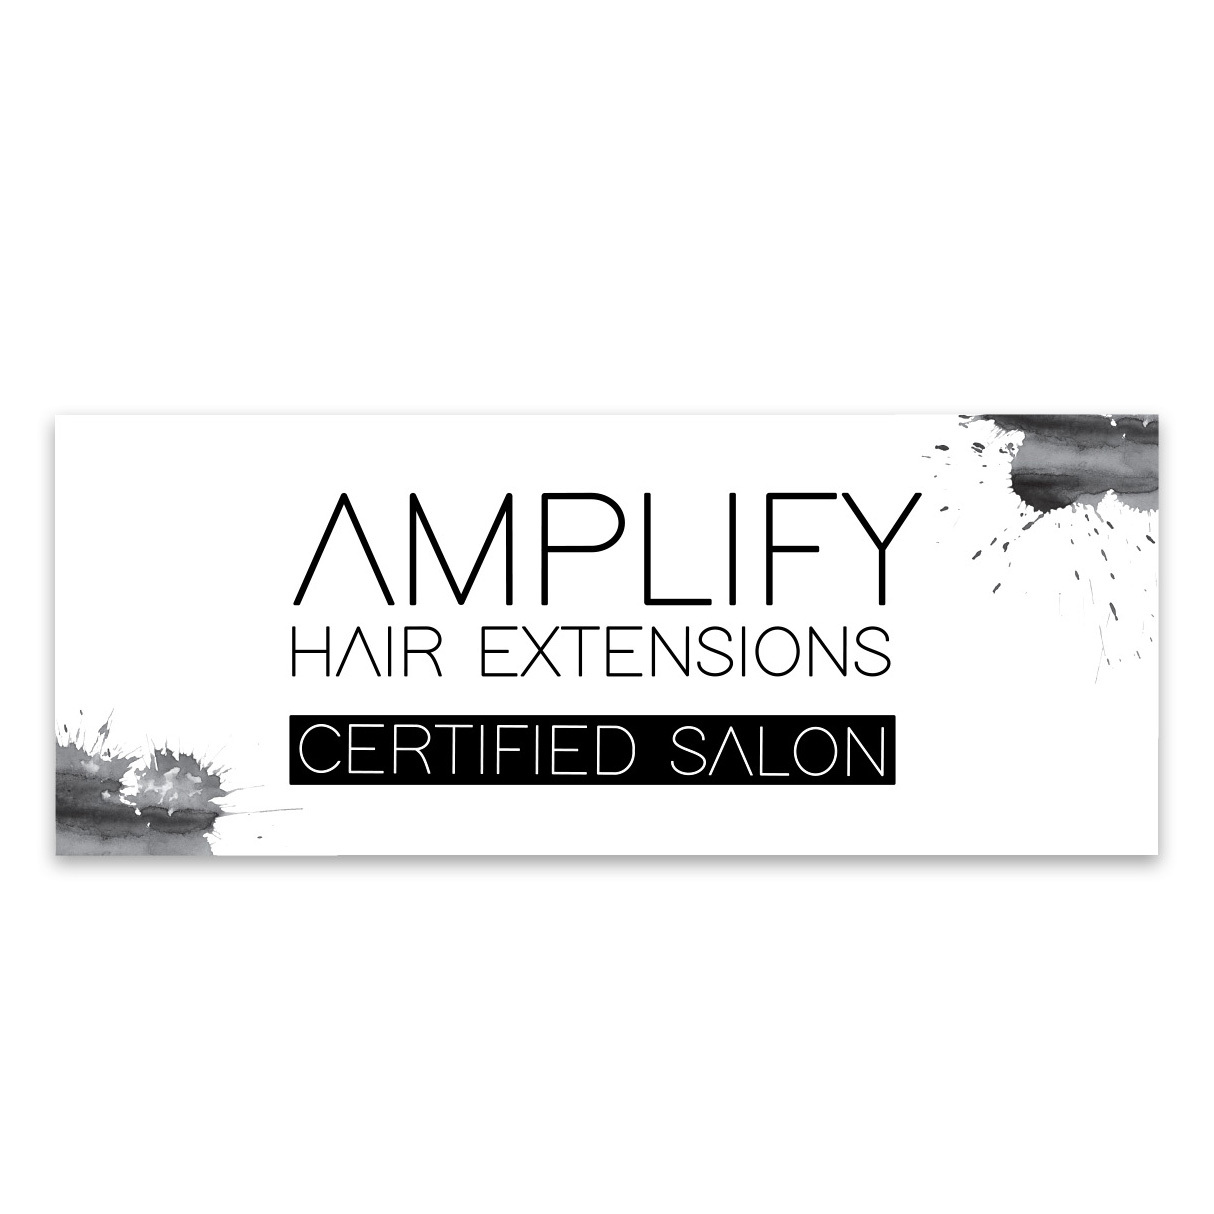 AMPLIFY TOOLS & SUPPLIES: Certified Salon Mirror Cling